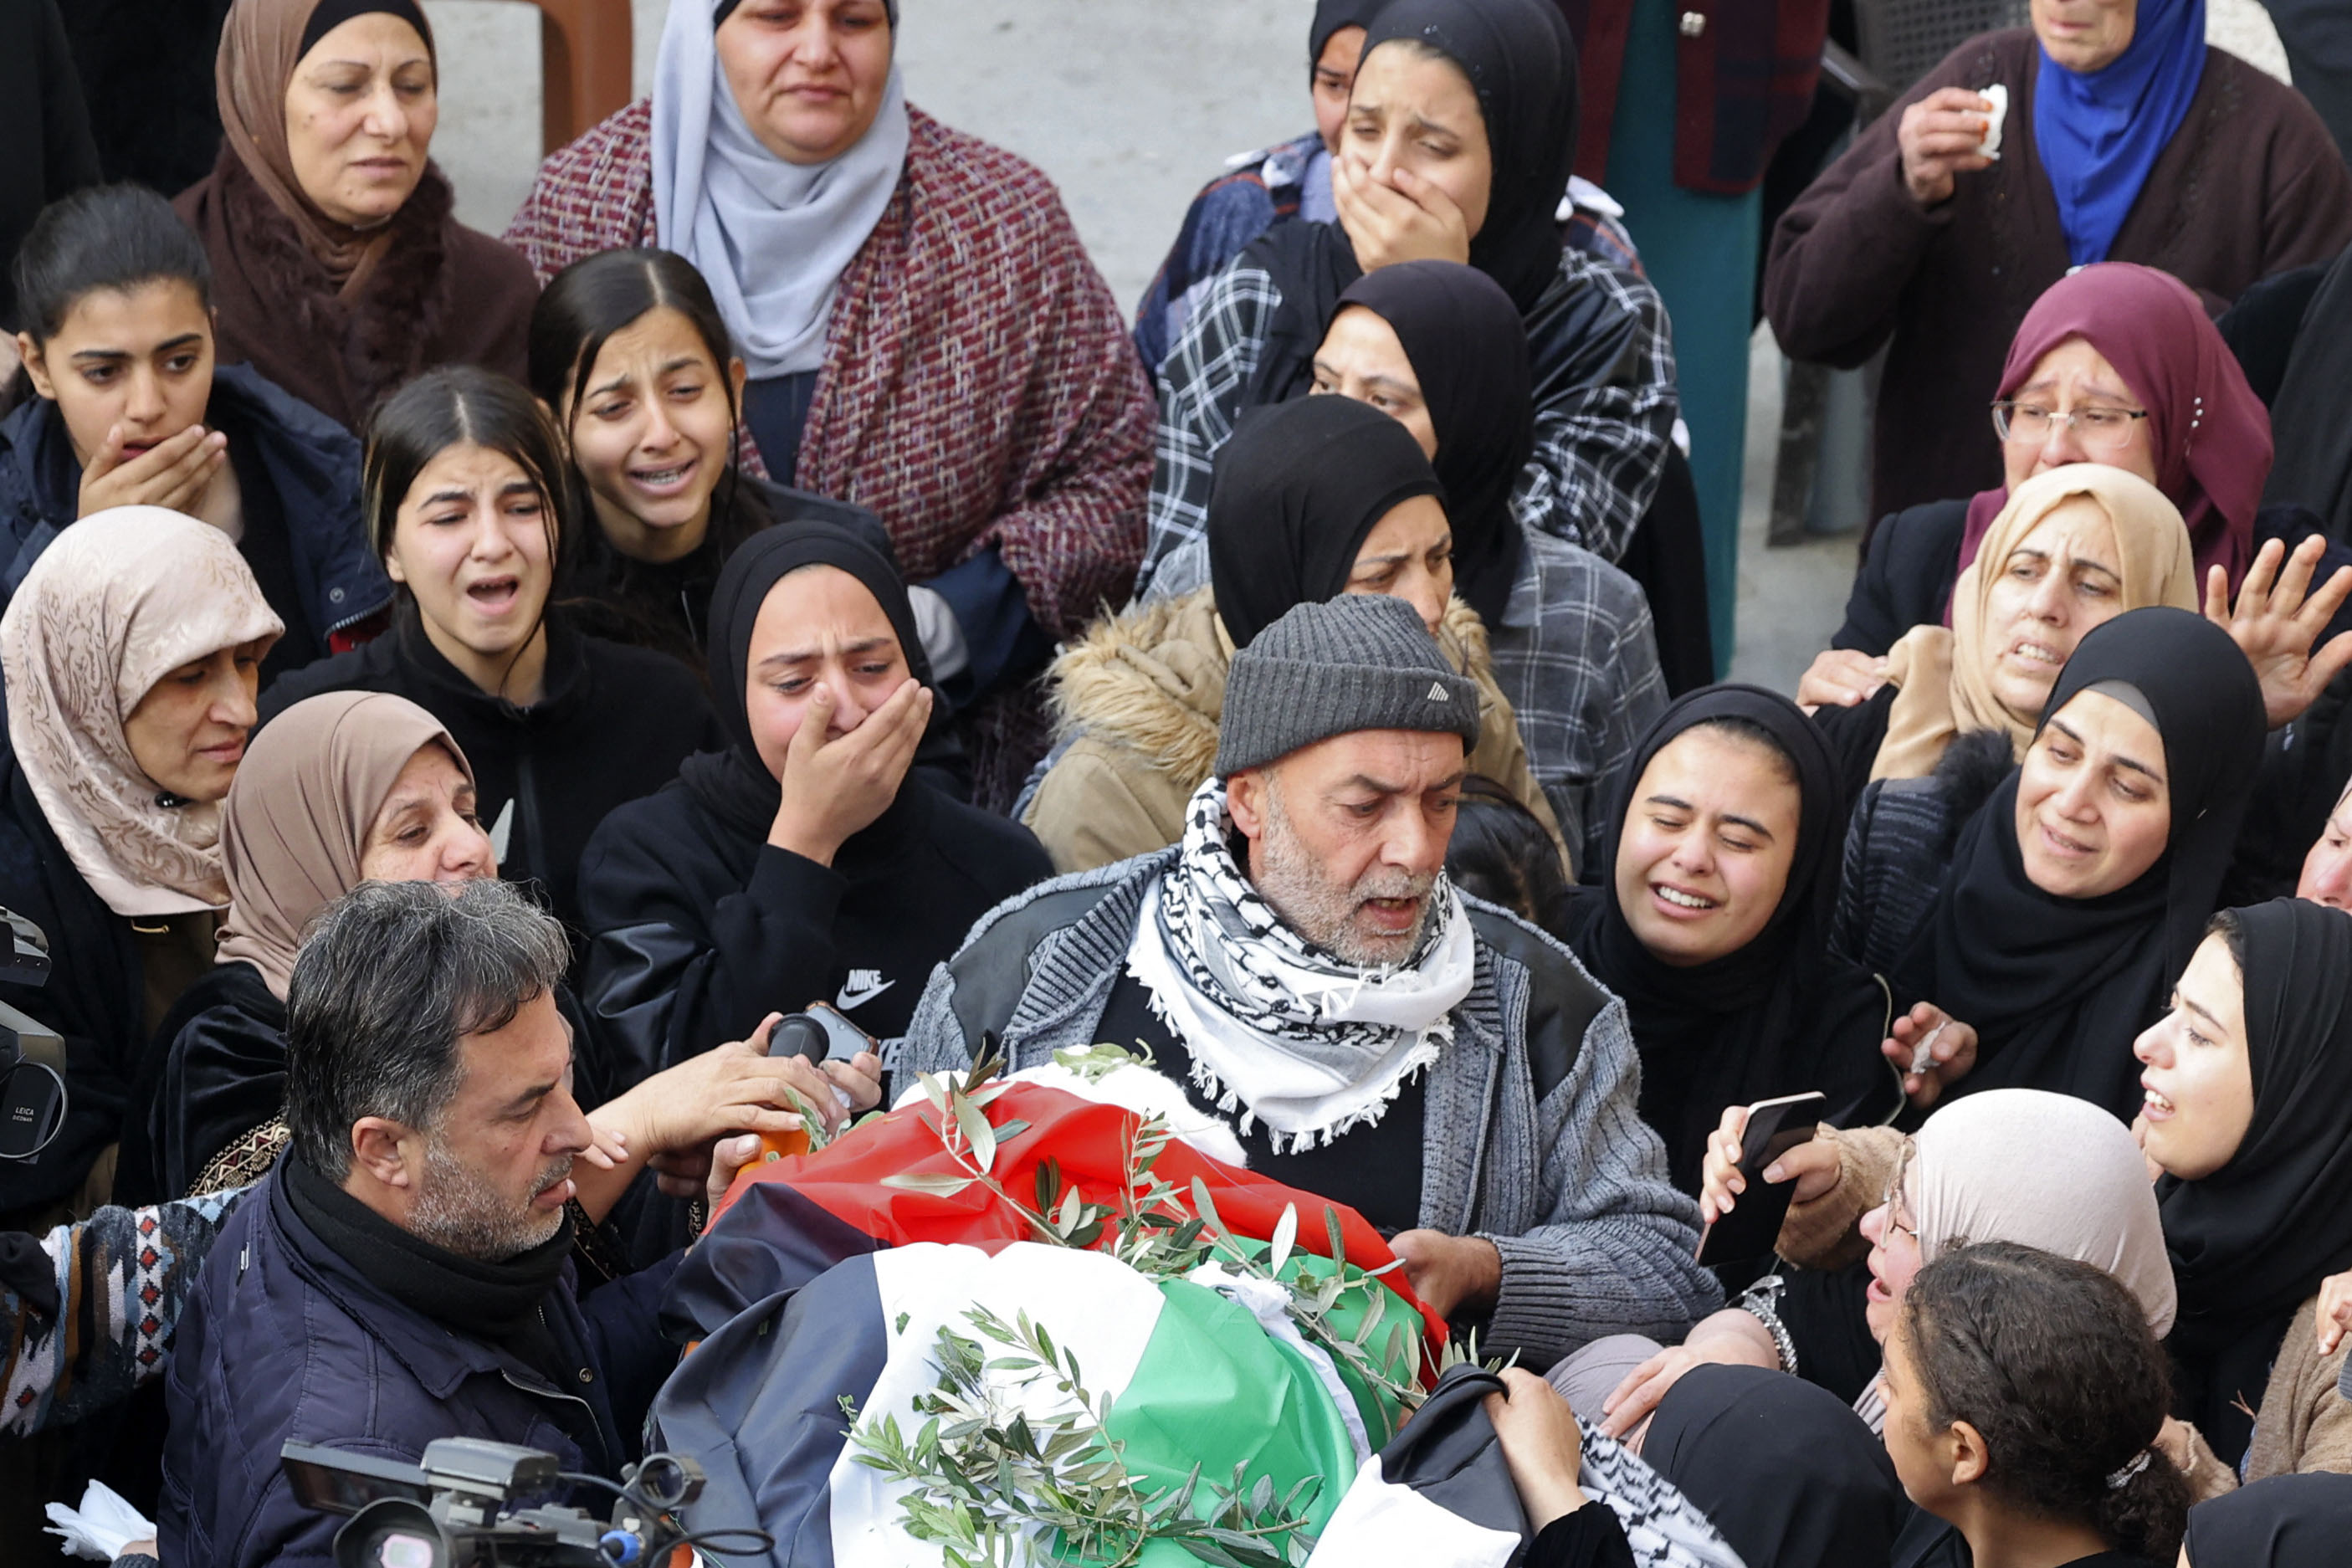 Palestinian mourners attend the funeral of 16-year-old Jana Zakarnaa, who was killed during an Israeli raid in the occupied West Bank, on December 12, 2022 in the city of Jenin. - The teenage Palestinian girl was found shot dead on the roof of her house after an Israeli raid in the occupied West bank, official Palestinian sources said. (Photo by JAAFAR ASHTIYEH / AFP)